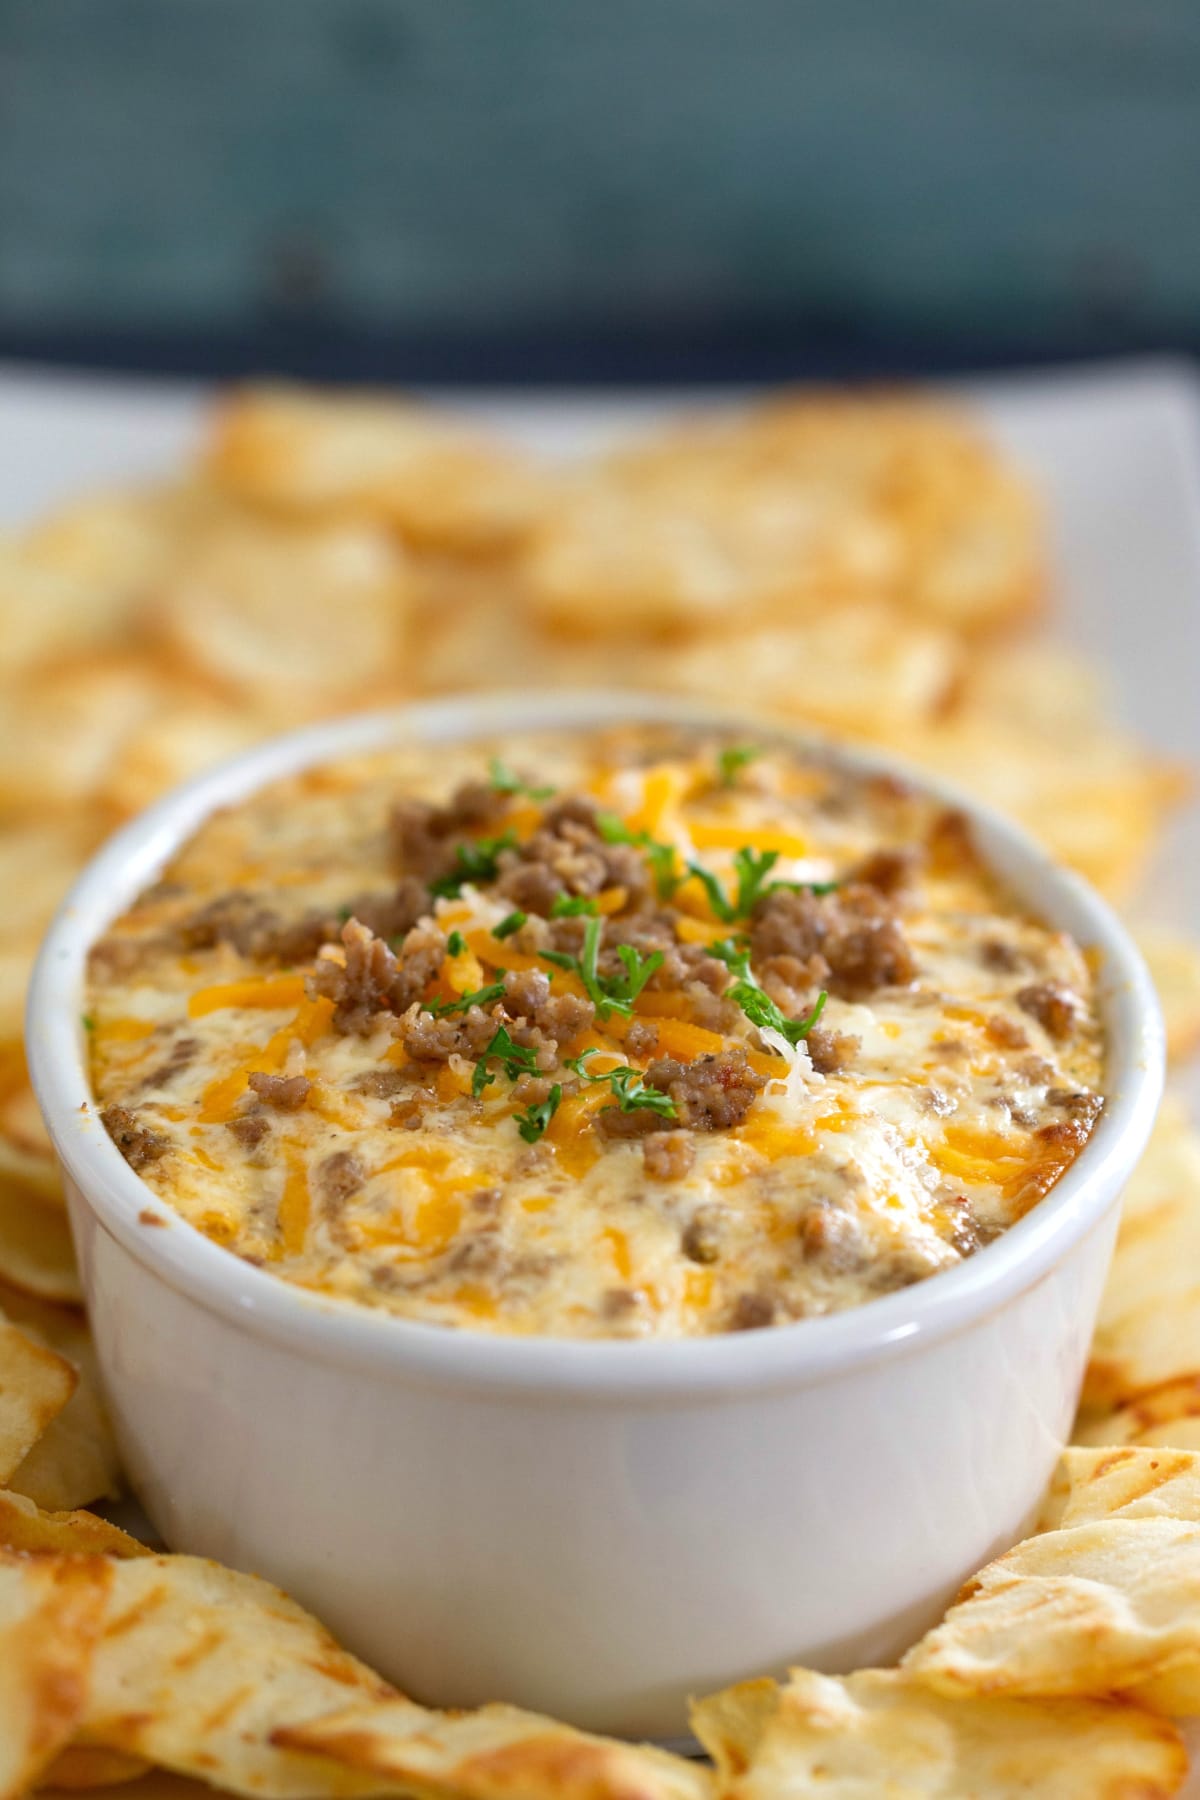 Sausage cheese dip with chips